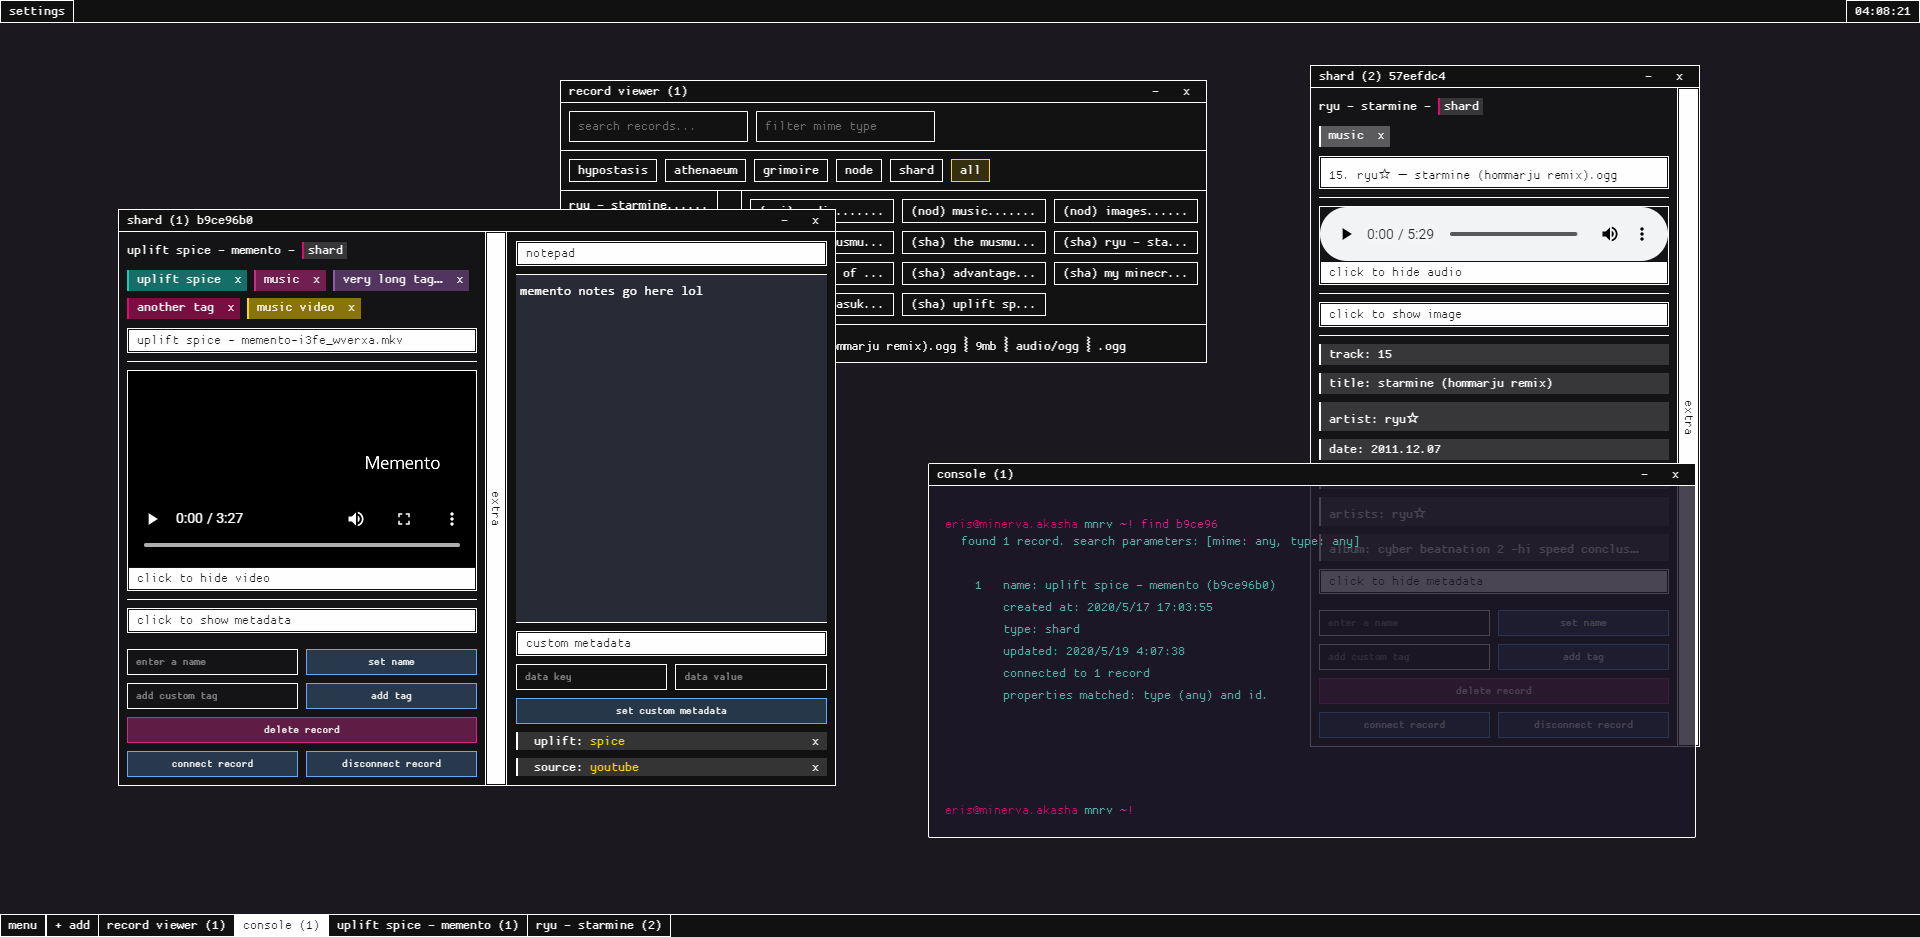 an image of minerva's akasha's current interface.